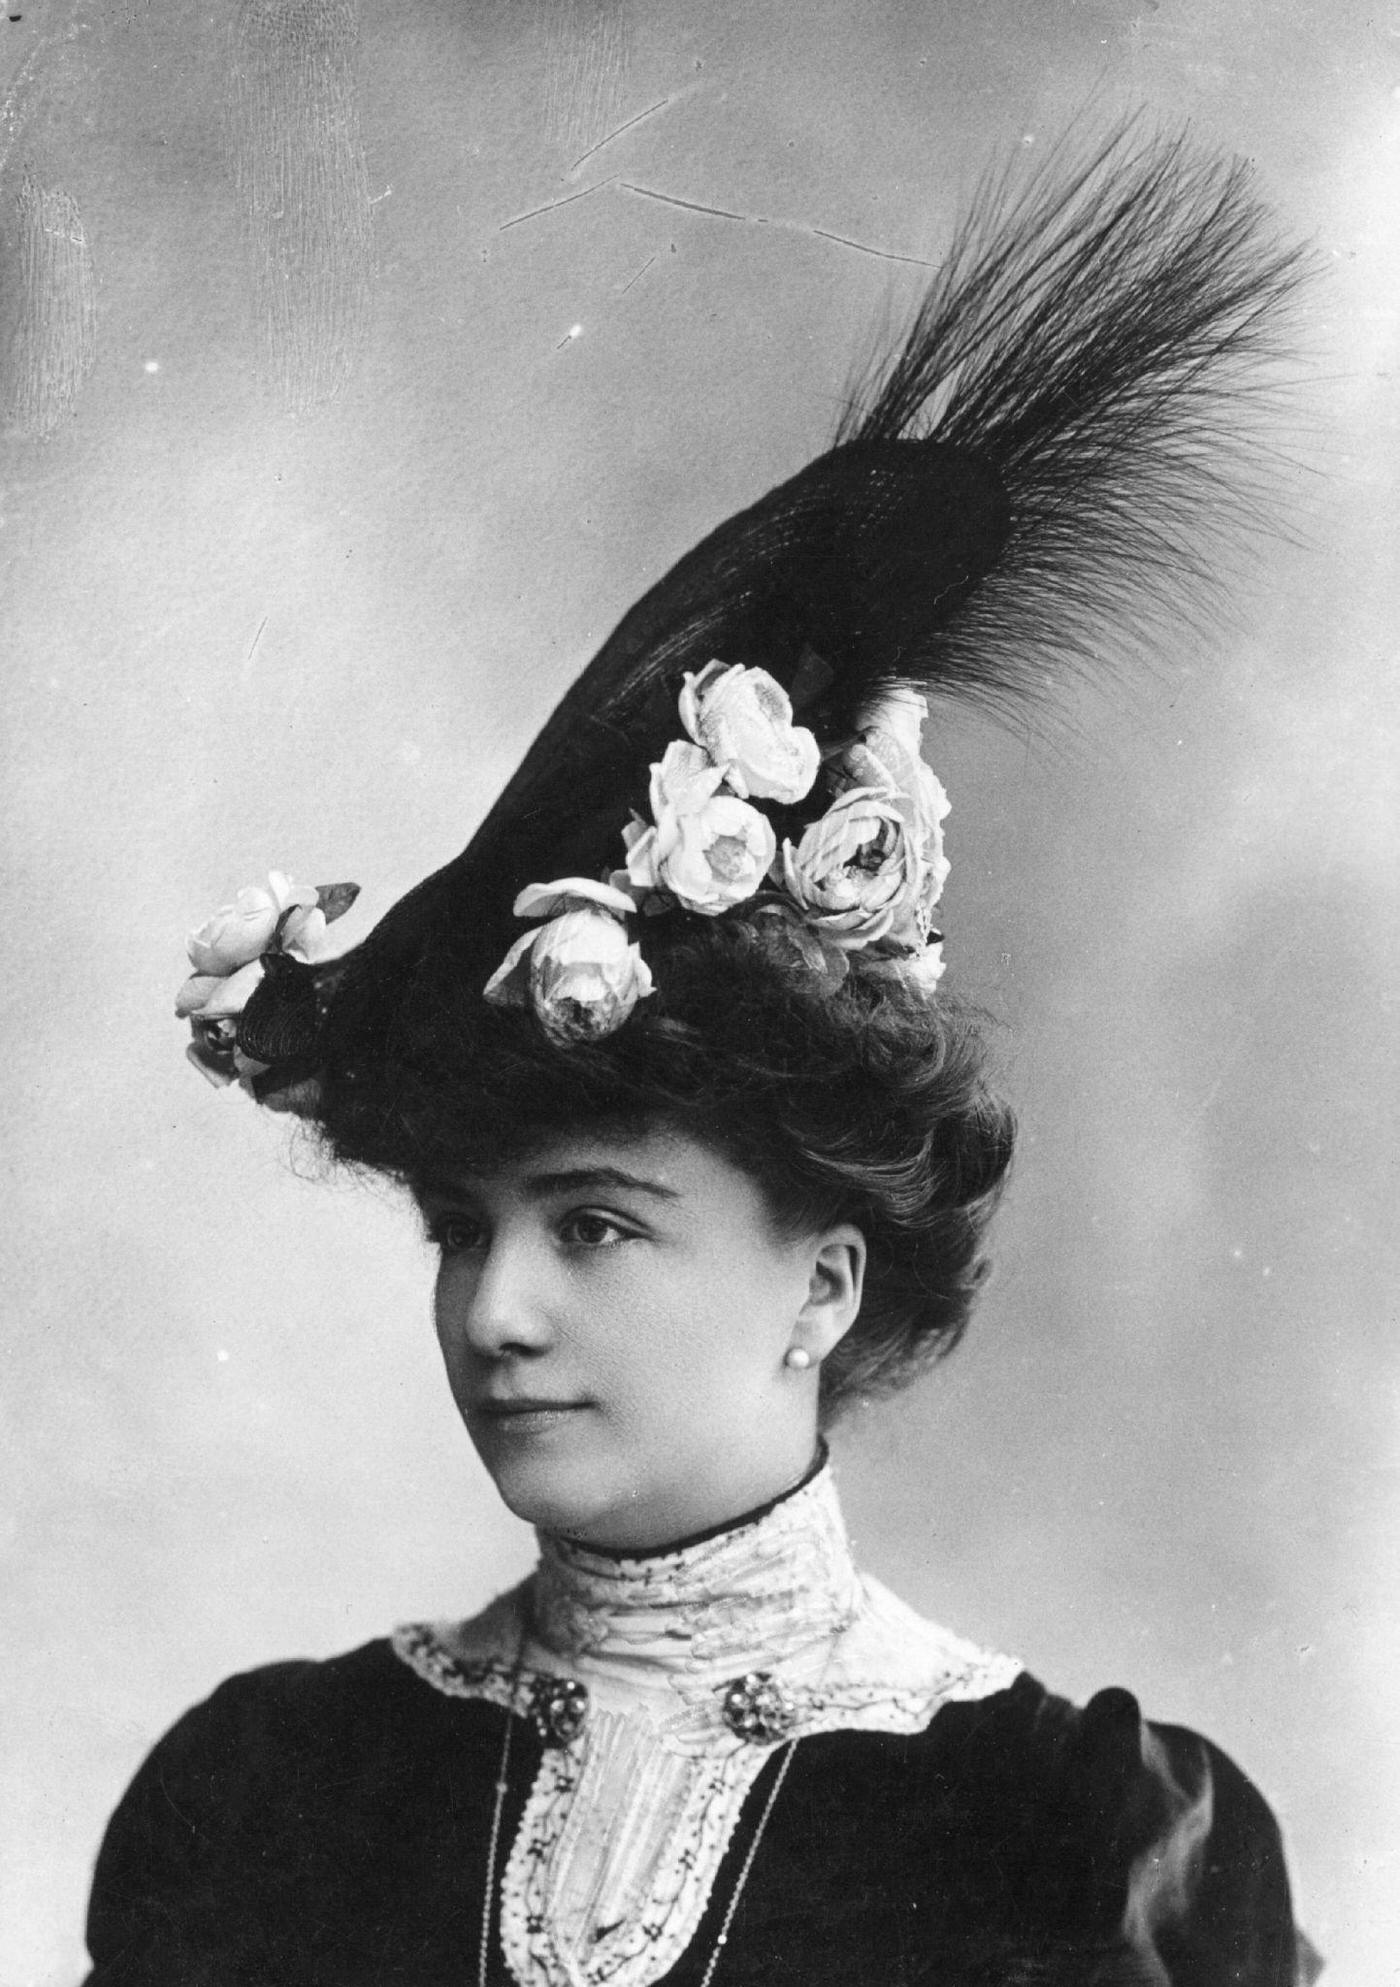 An Edwardian woman wears a circular hat with flower and feather trimming in 1903